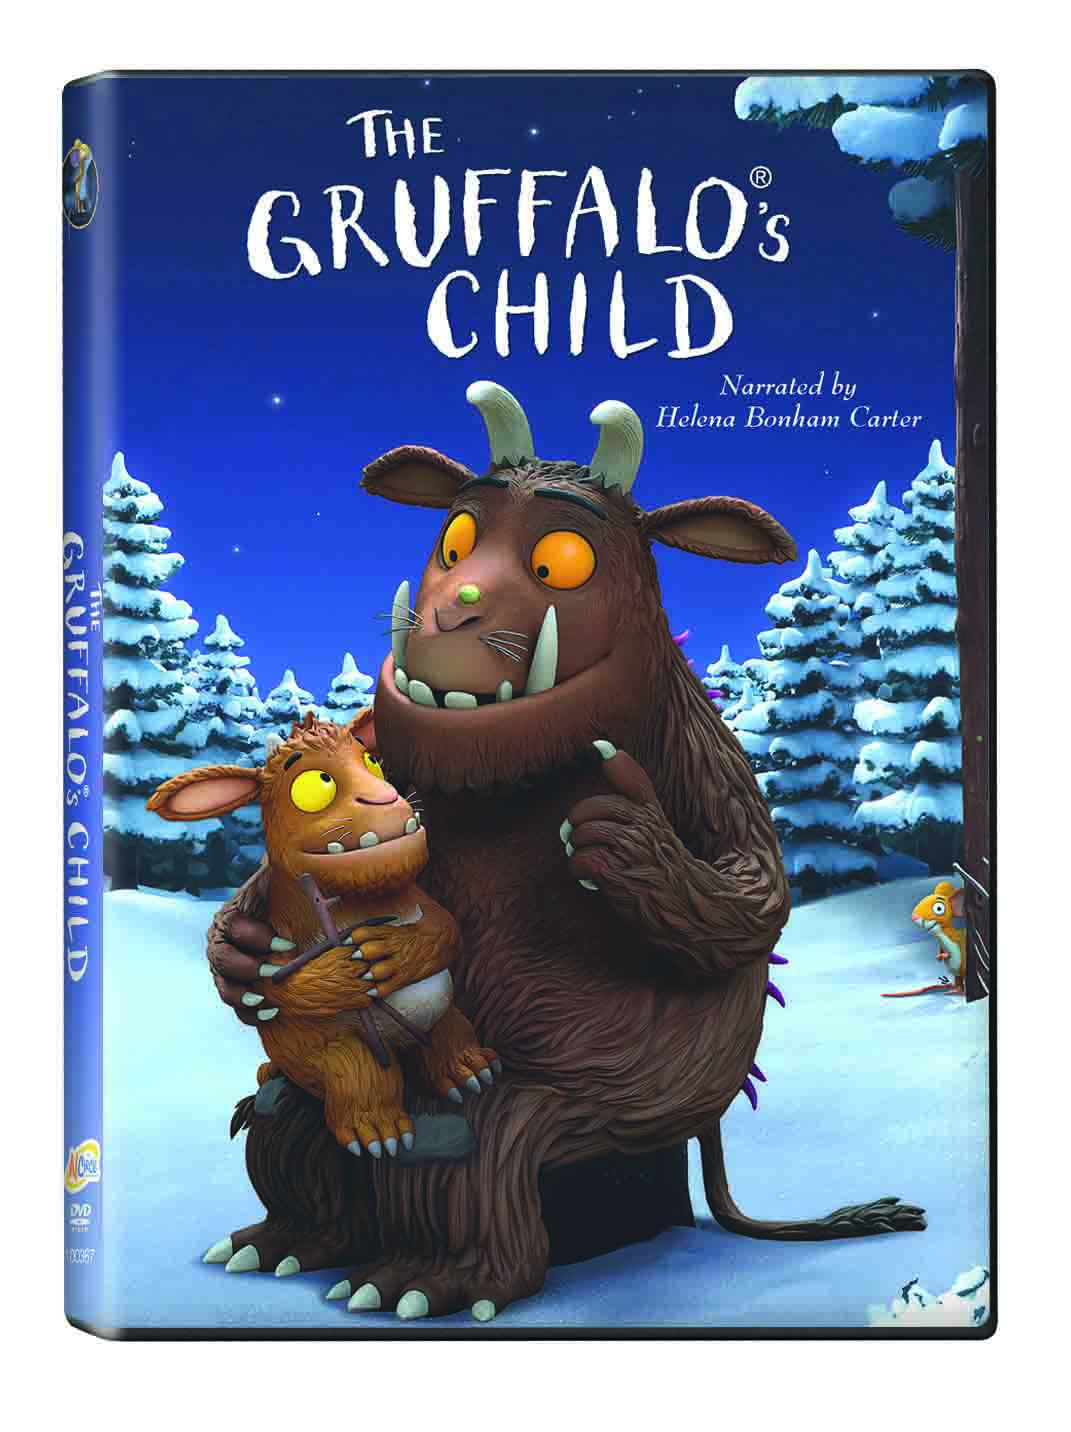 The Gruffalo’s Child Book and Movie Review and Giveaway!